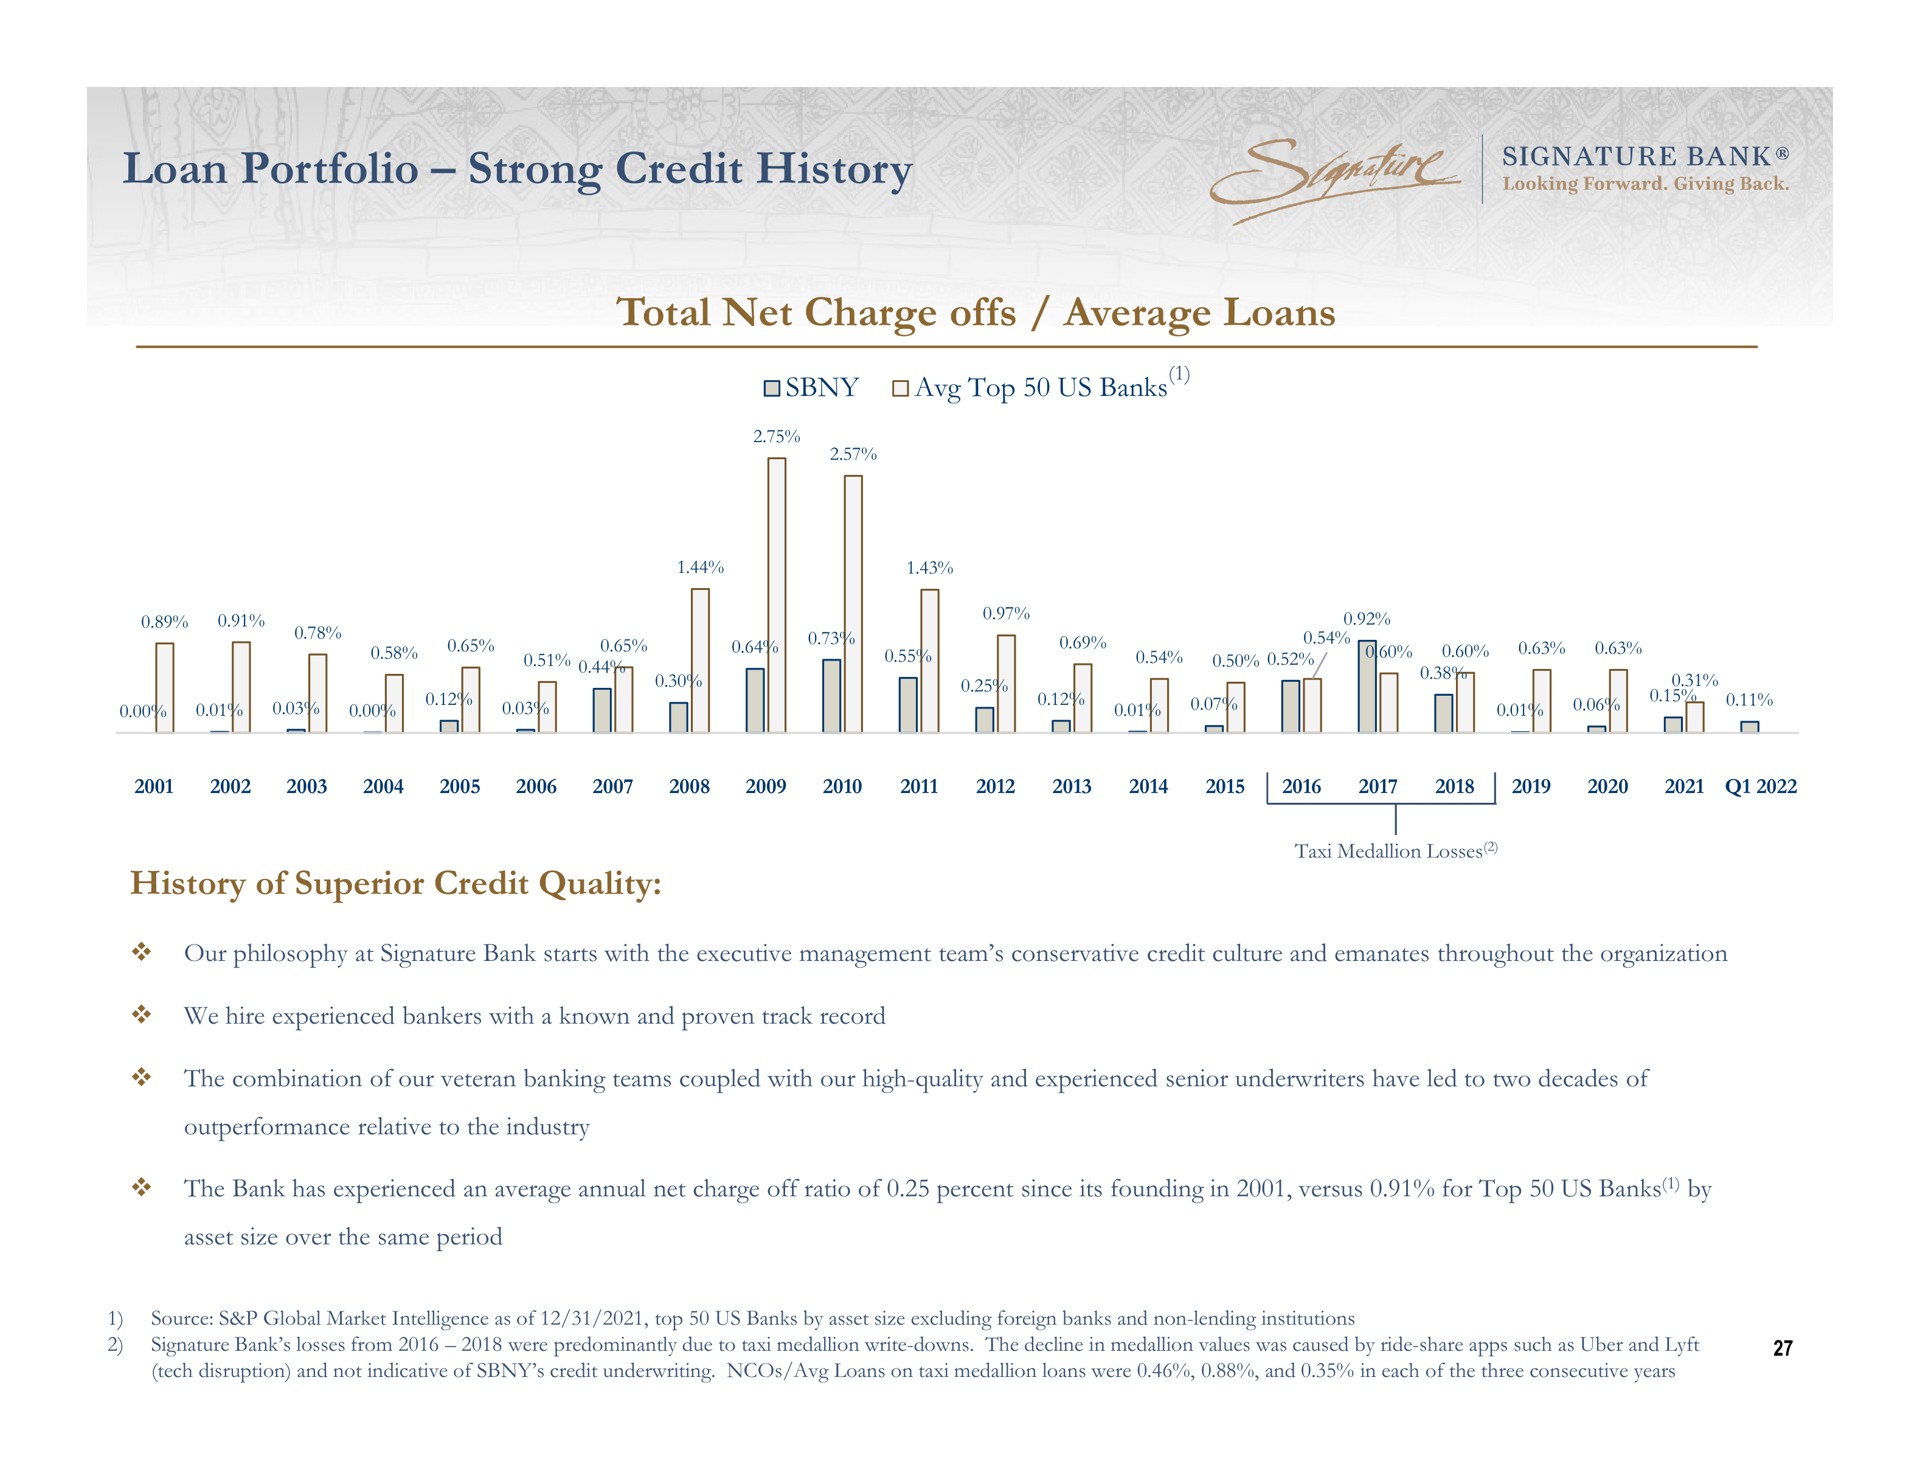 loan portfolio strong credit history total net charge offs average loans top us banks of superior quality | Signature Bank